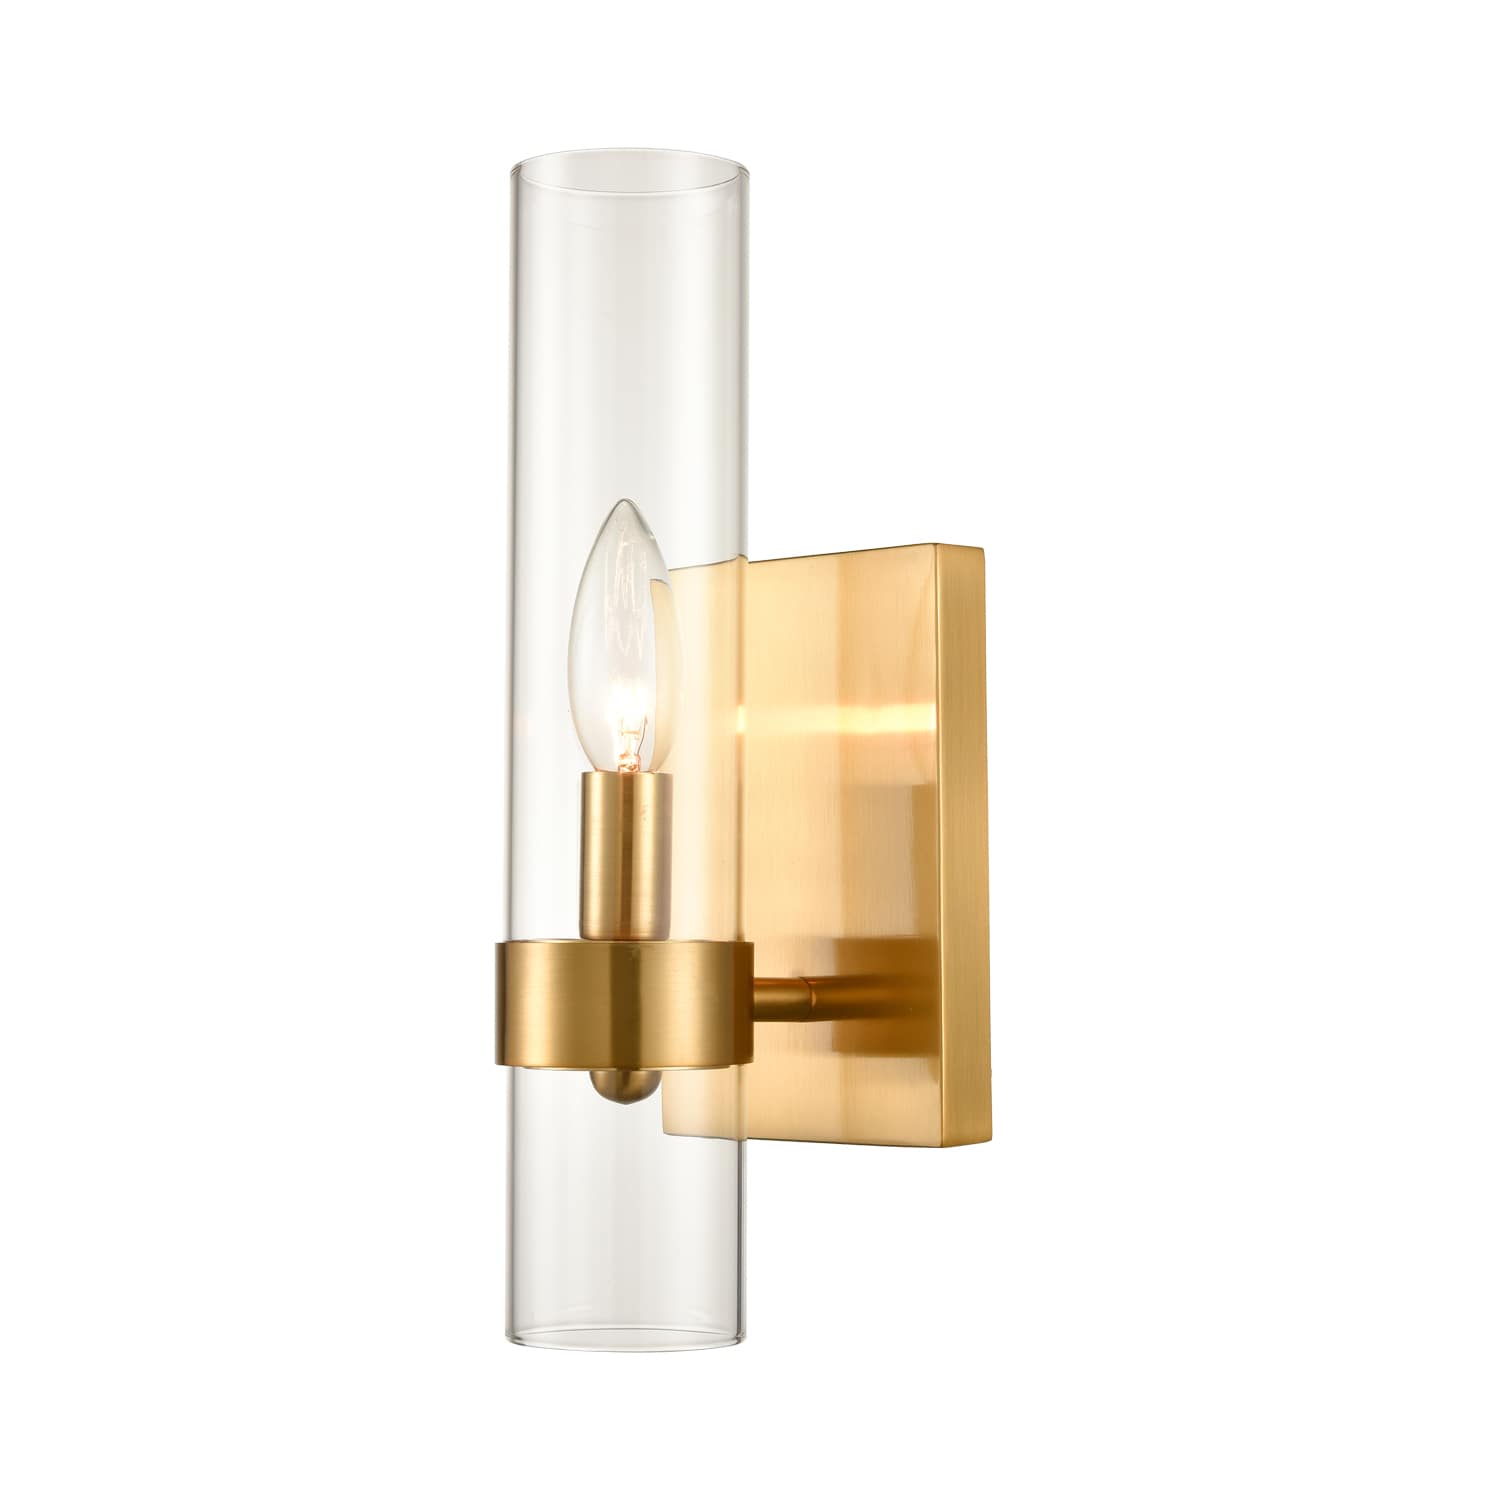 Brushed Gold with Glass Shade 1 Light Wall Sconces Wall Light Fixture